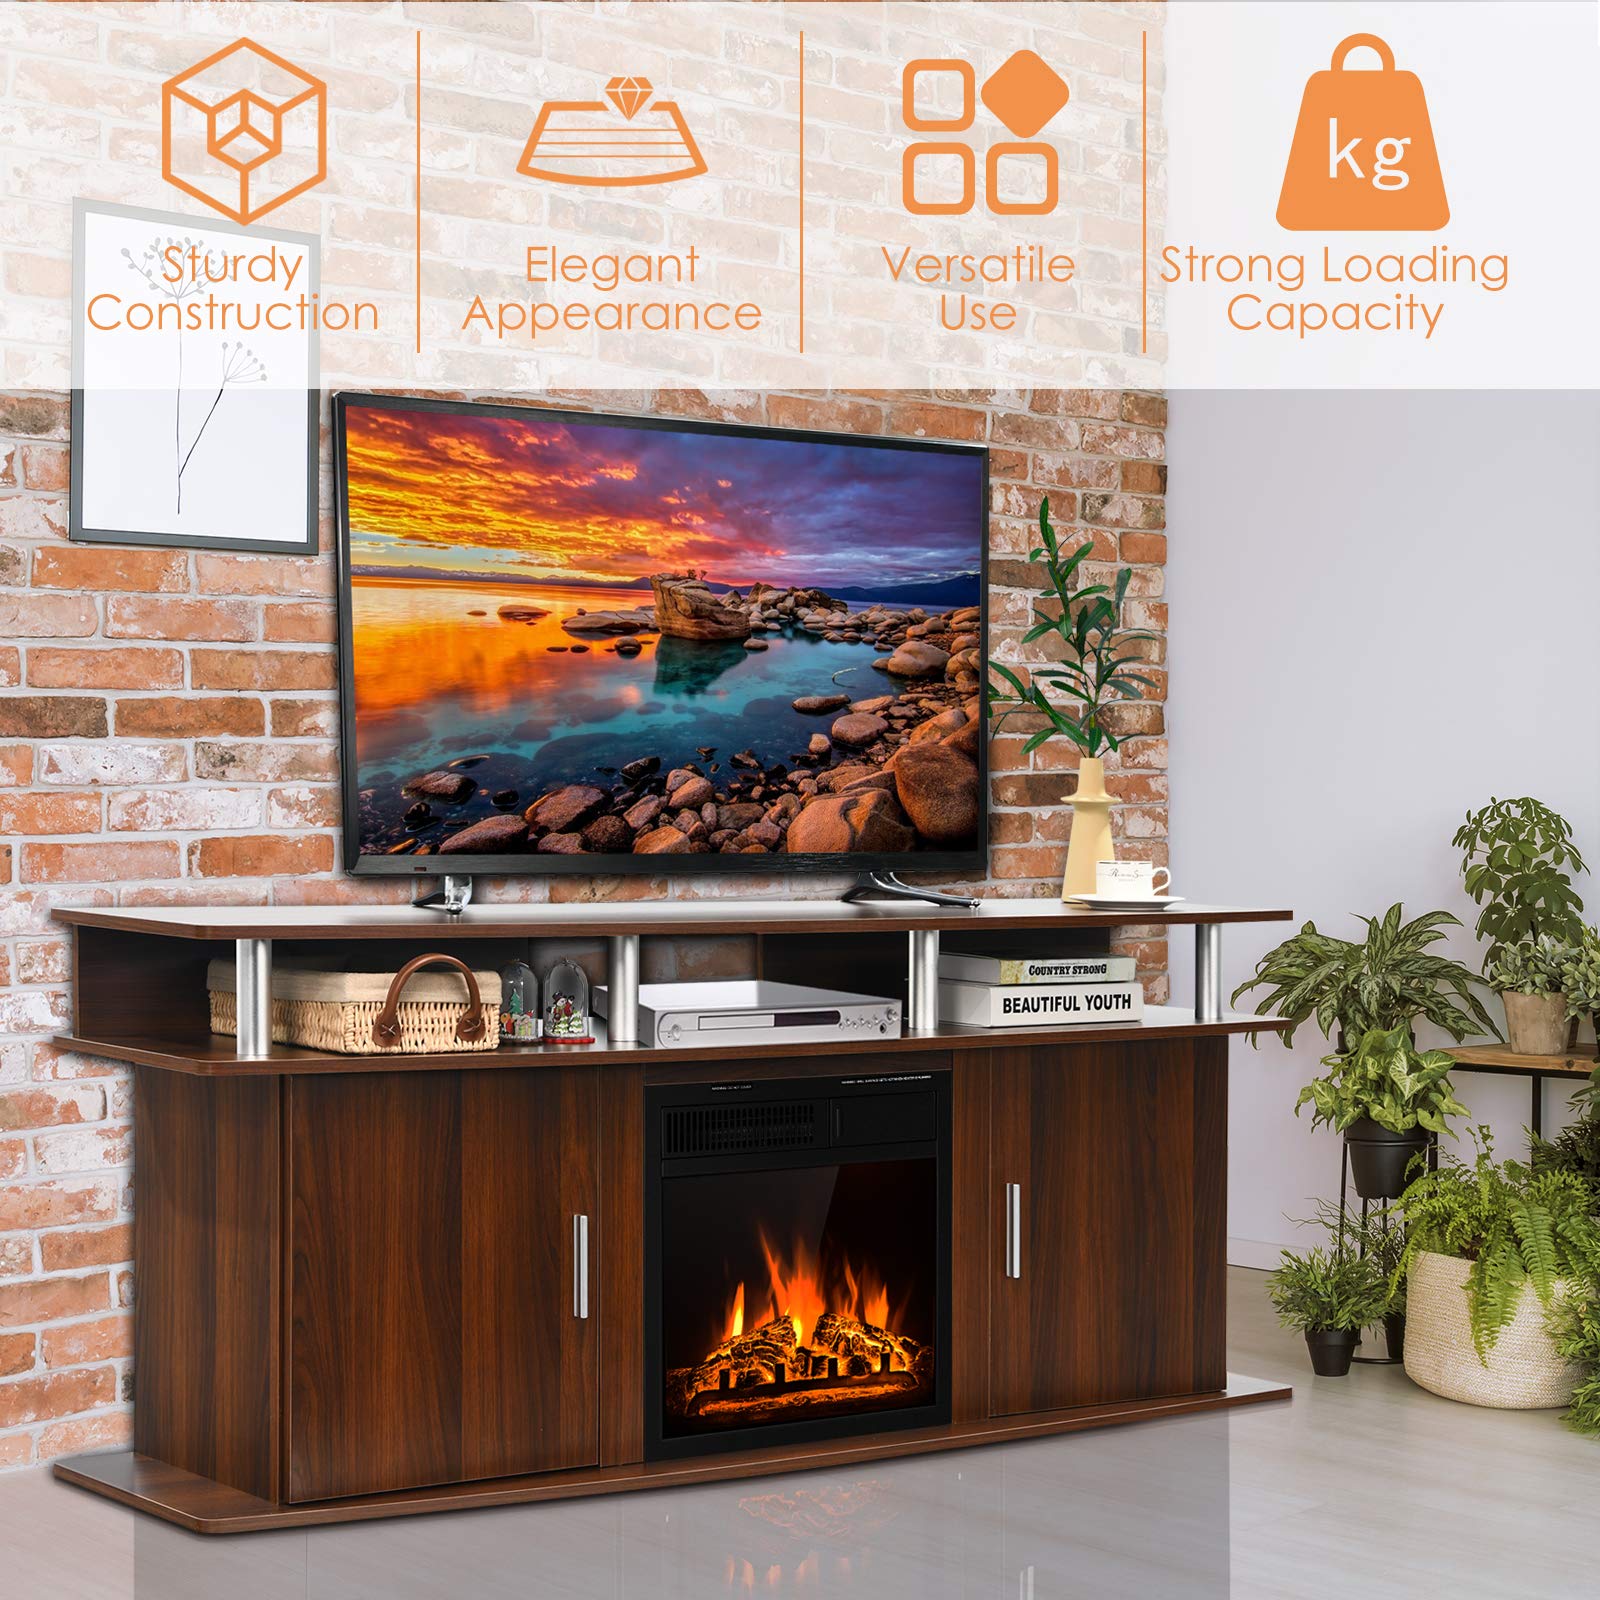 Tangkula Fireplace TV Stand, Living Room Media Console Table w/1500W Electric Fireplace for TVs up to 70 Inches, Modern TV Console w/Fireplace, Remote Control & Adjustable Brightness (Cherry)